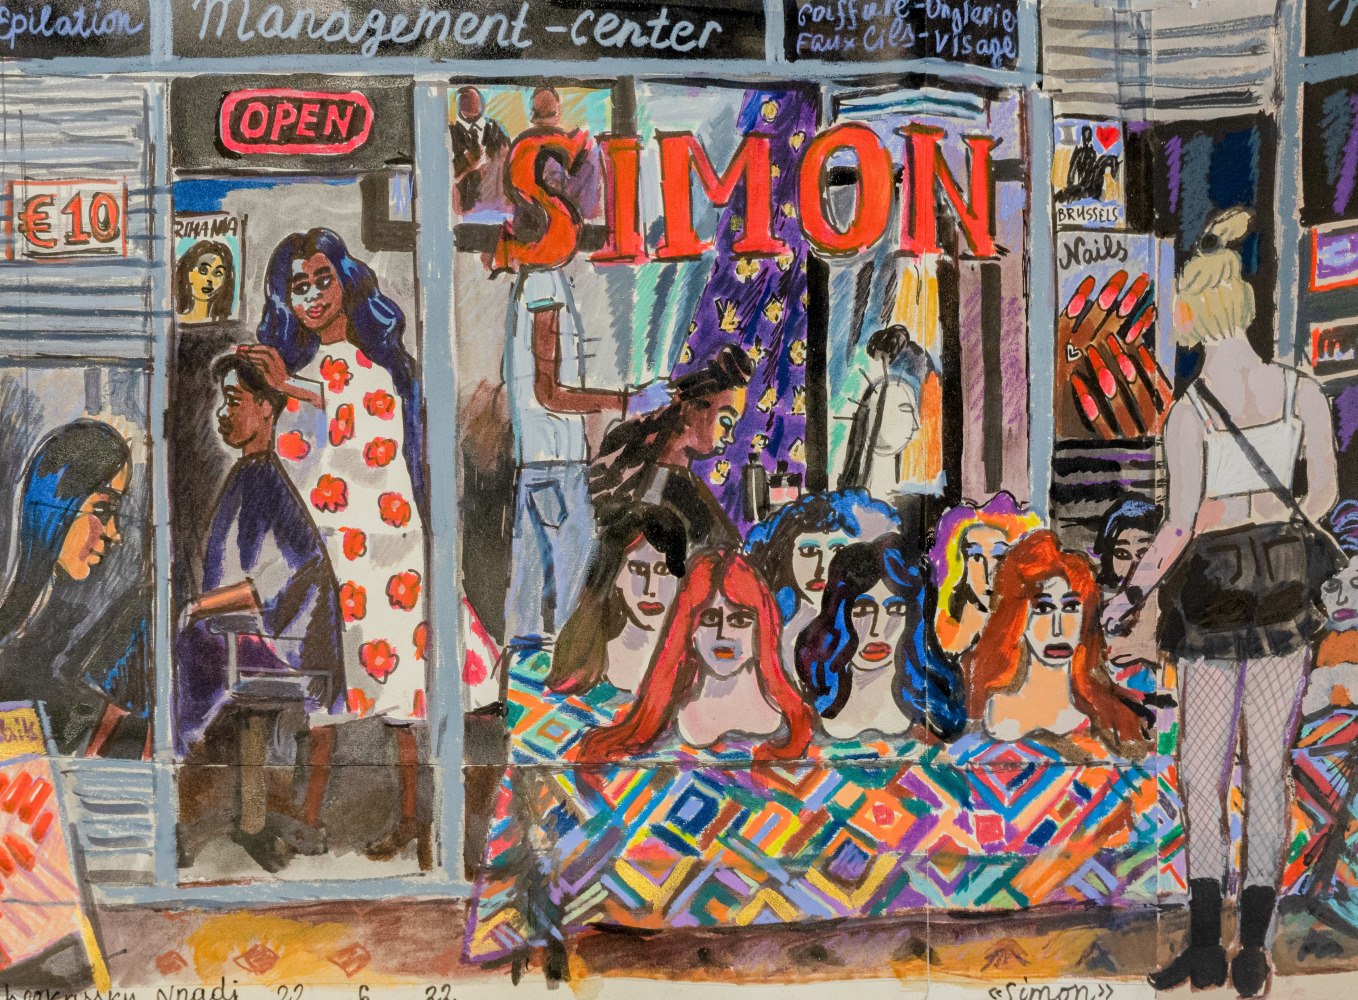 Painting of the simon salon from outside the shop